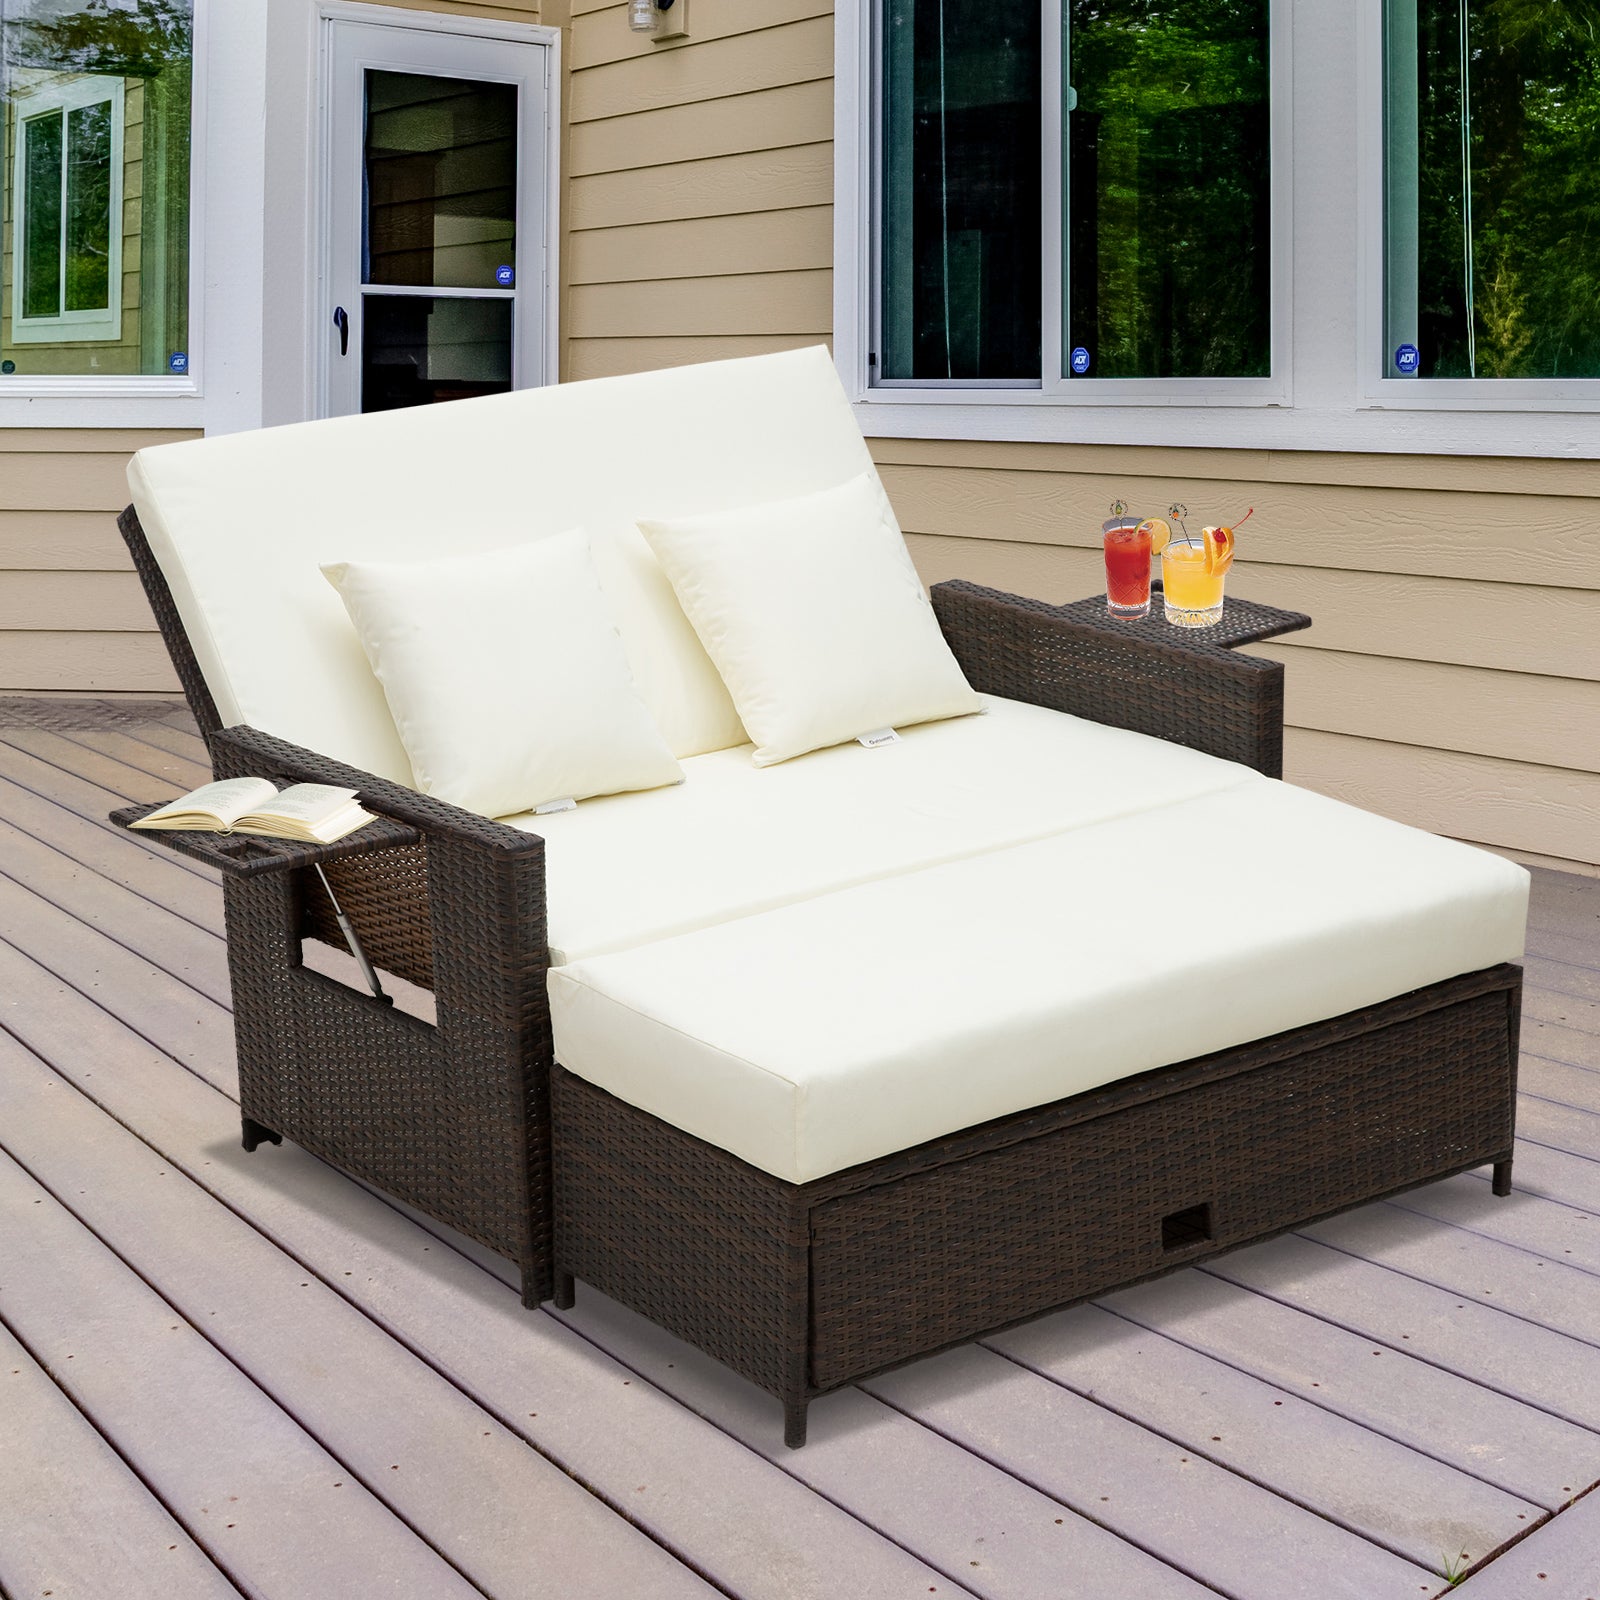 Outsunny 2 Seater Assembled Garden Patio Outdoor Rattan Furniture Sofa Sun Lounger Daybed with Fire Retardant Sponge - Brown - OutdoorBox